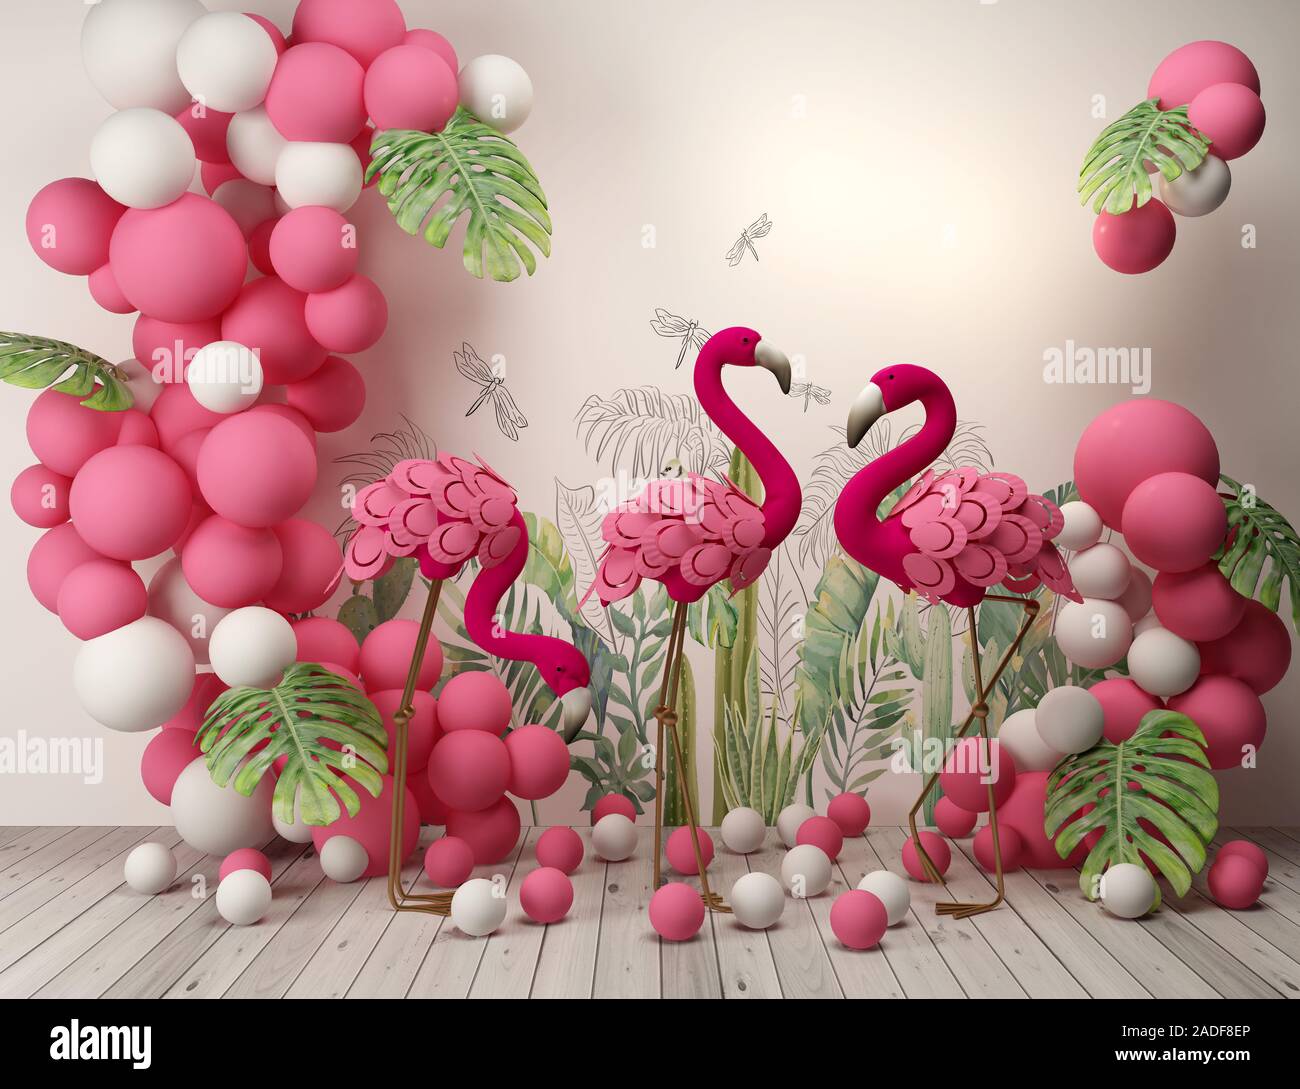 3d render of pink balloons with love decor Stock Photo